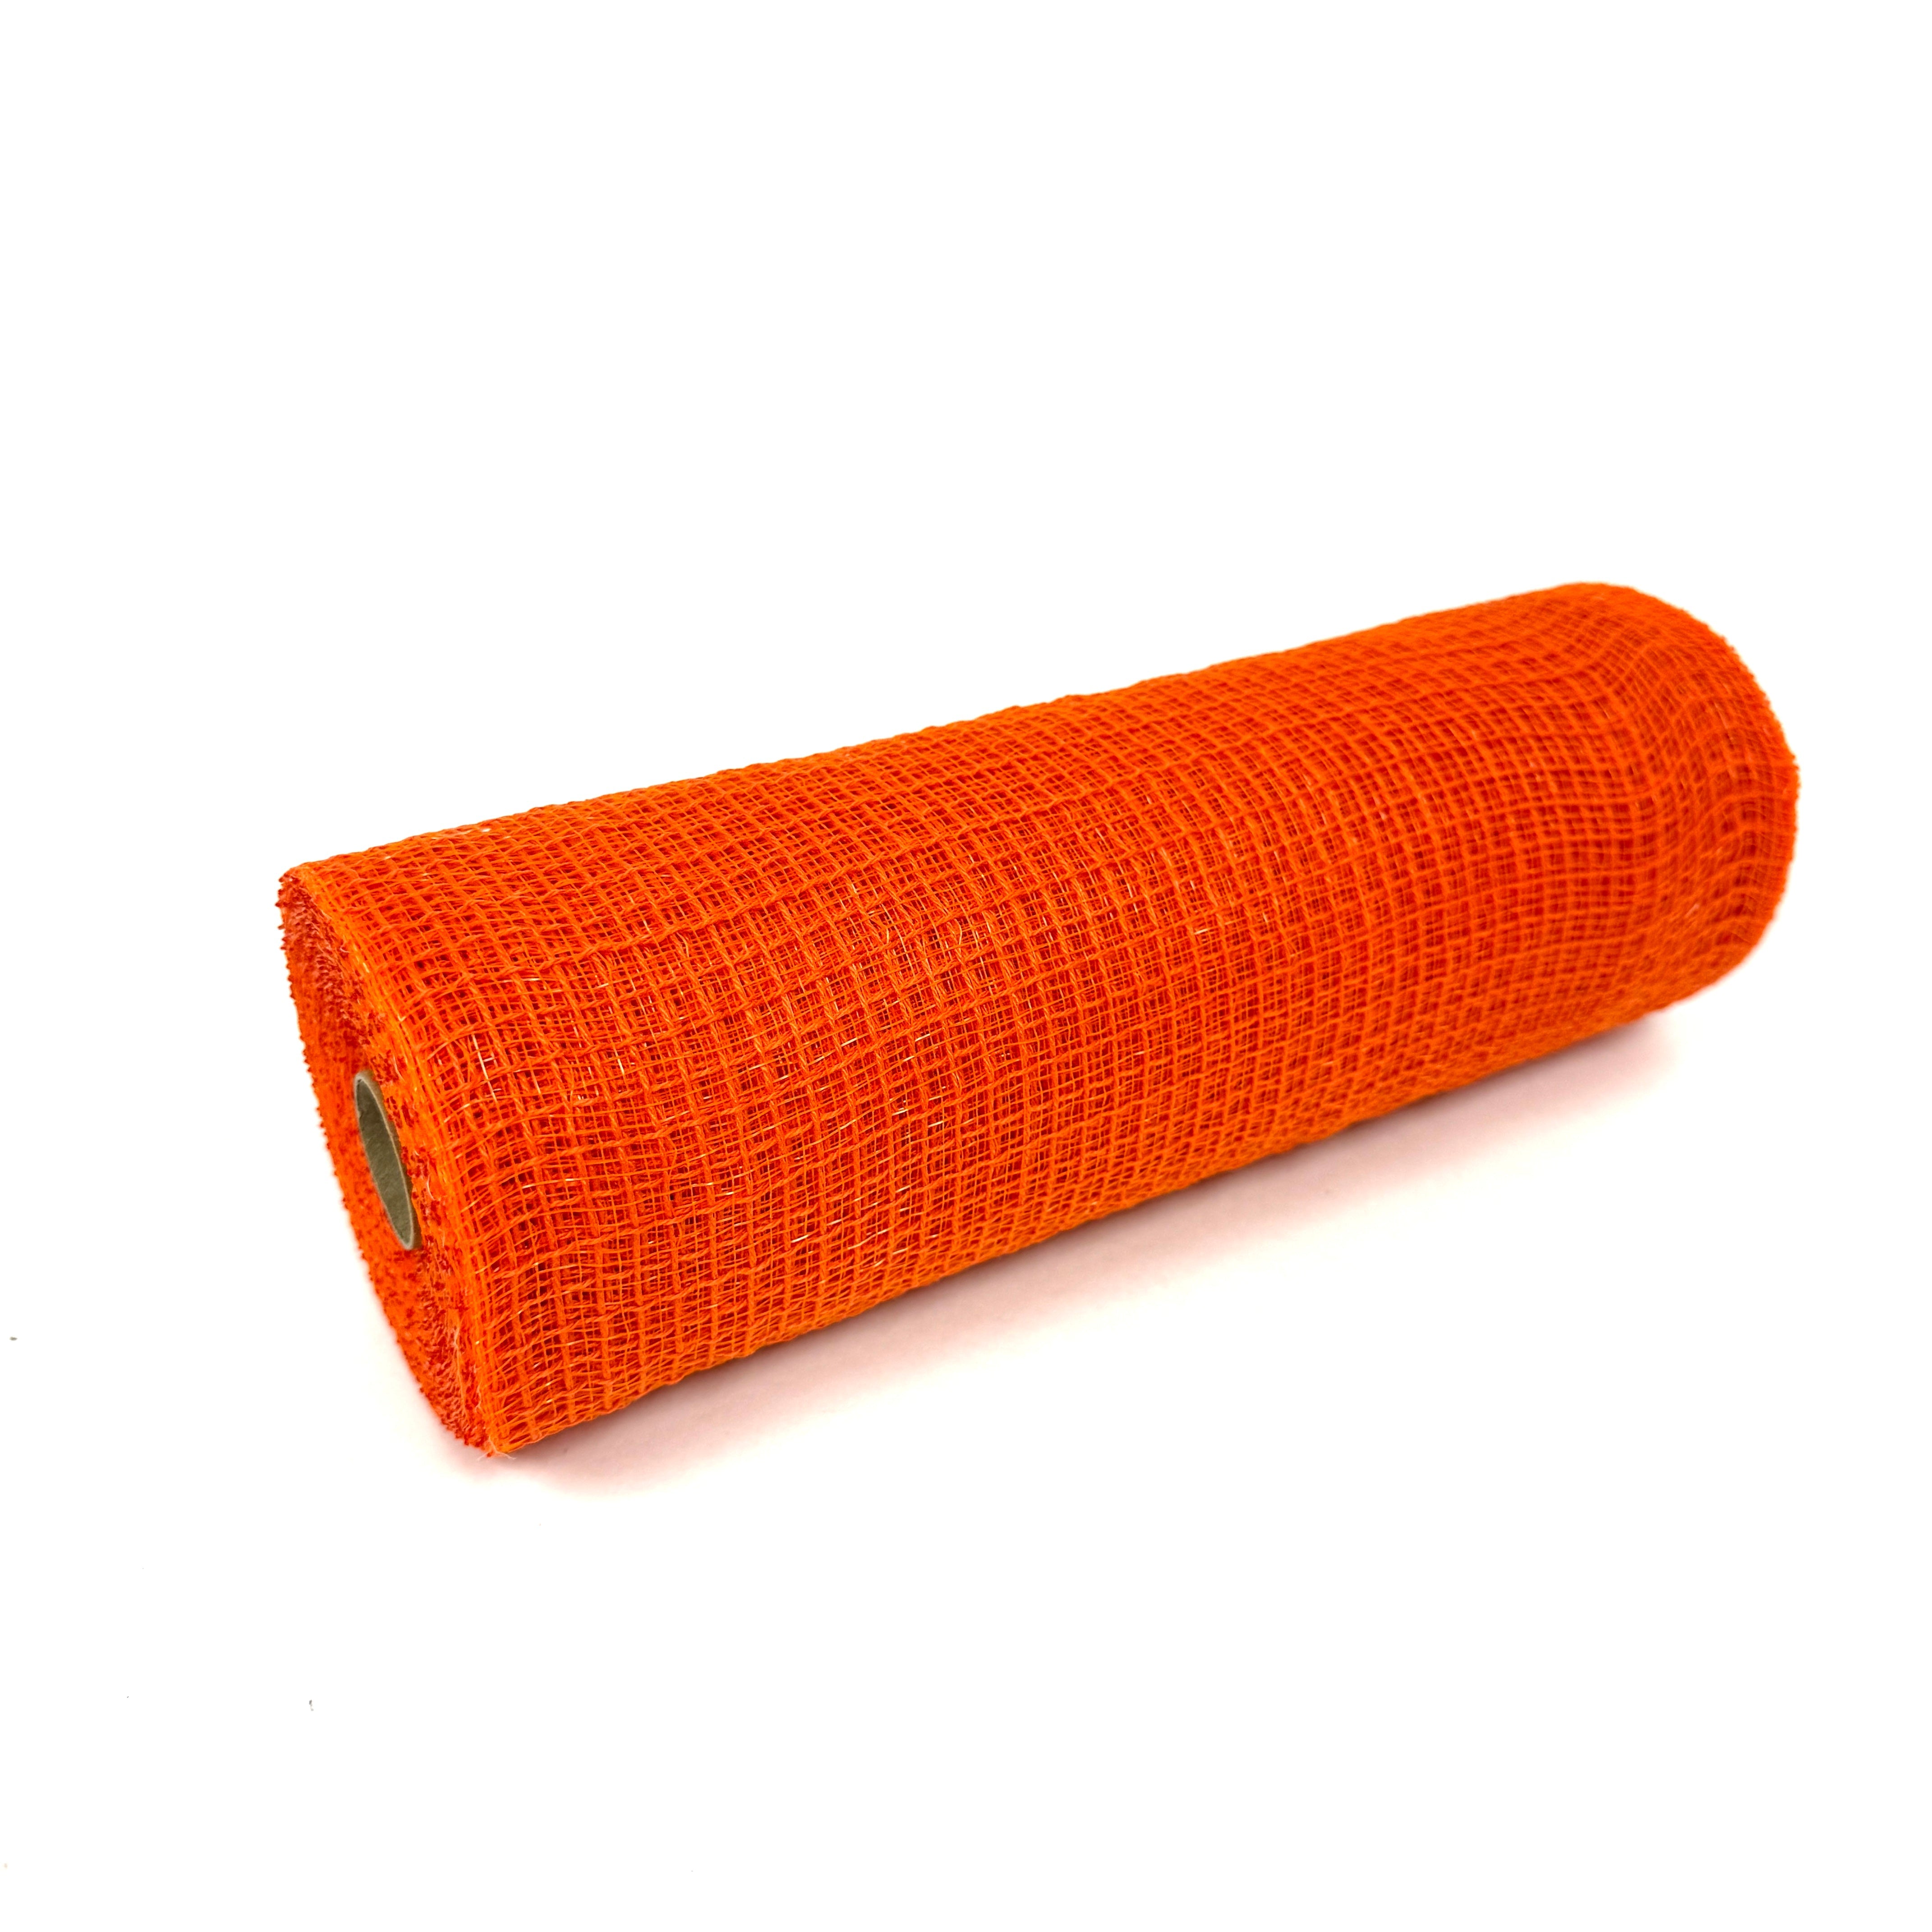 10 Inch X 10 Yards Orange and White Two-tone Poly Burlap Mesh 